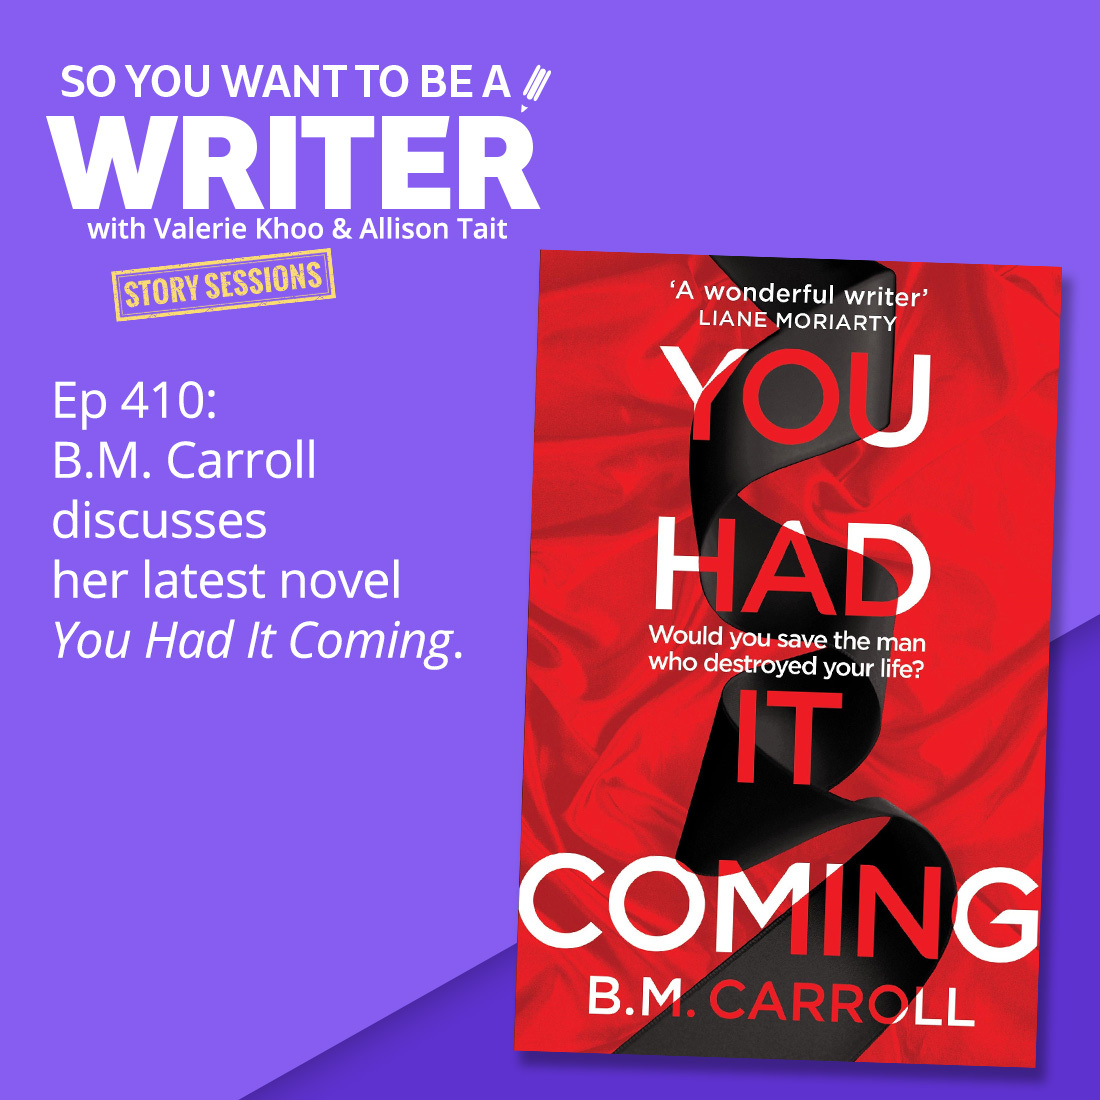 WRITER 410: B.M. Carroll discusses her latest novel 'You Had It Coming' [Story Sessions series]